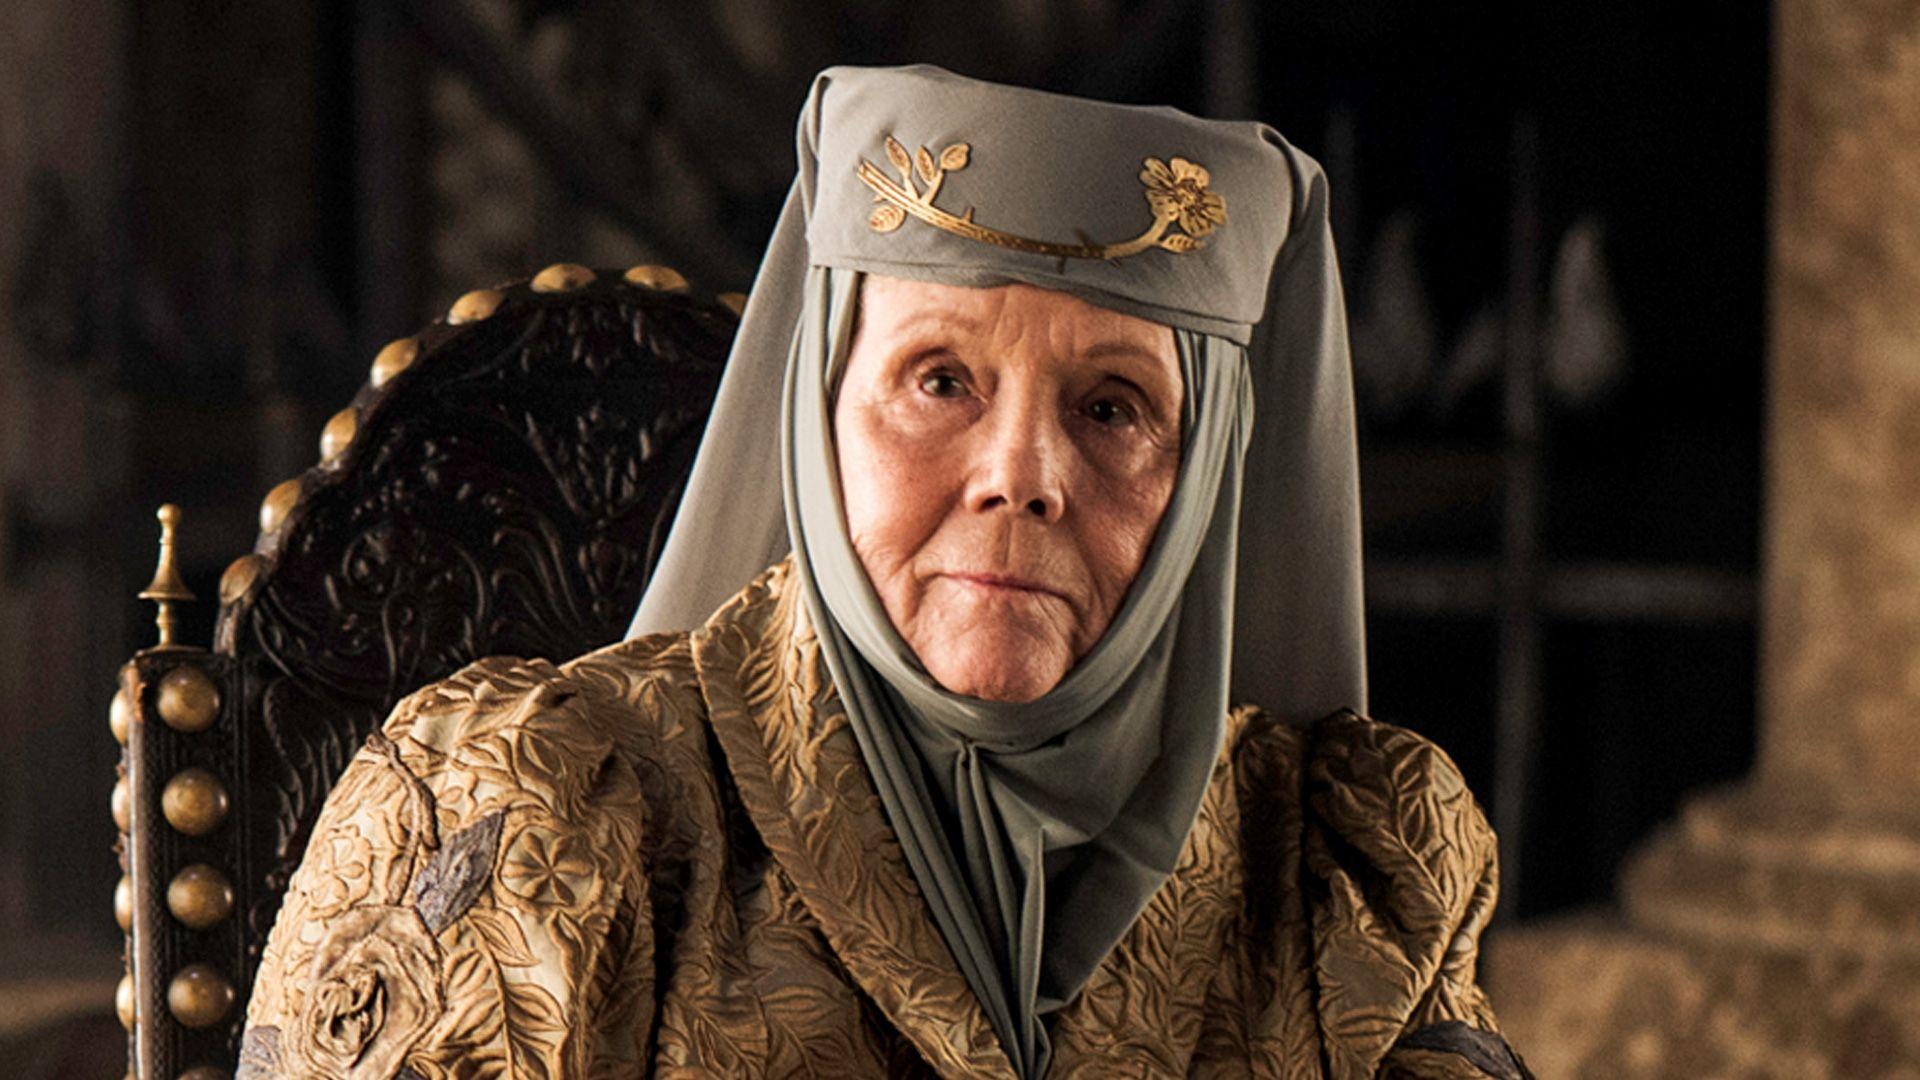 HBO: Game of Thrones: Olenna Tyrell: Bio